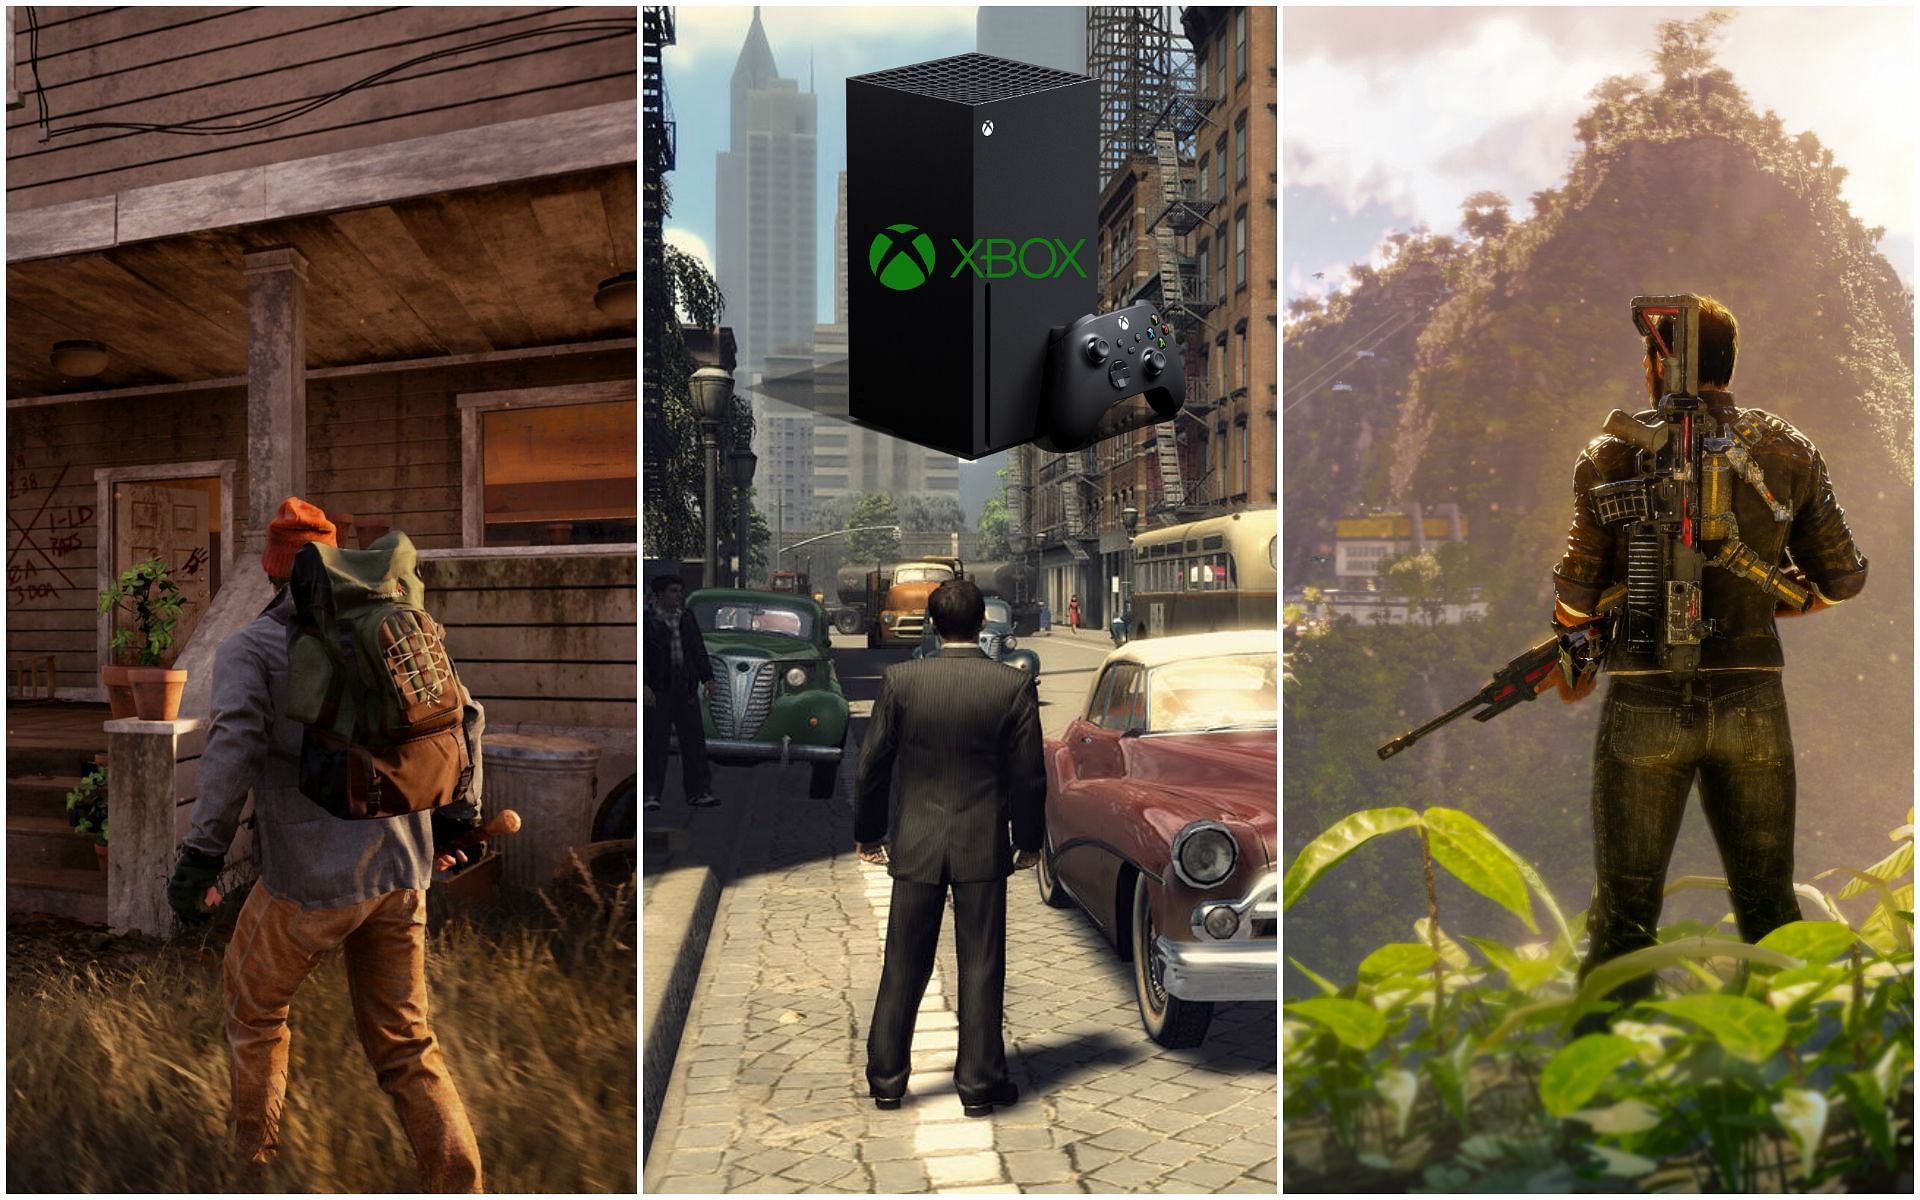 There are plenty of GTA 5-like games for Xbox consoles (Image via Undead Labs, 2K, and Avalanche)